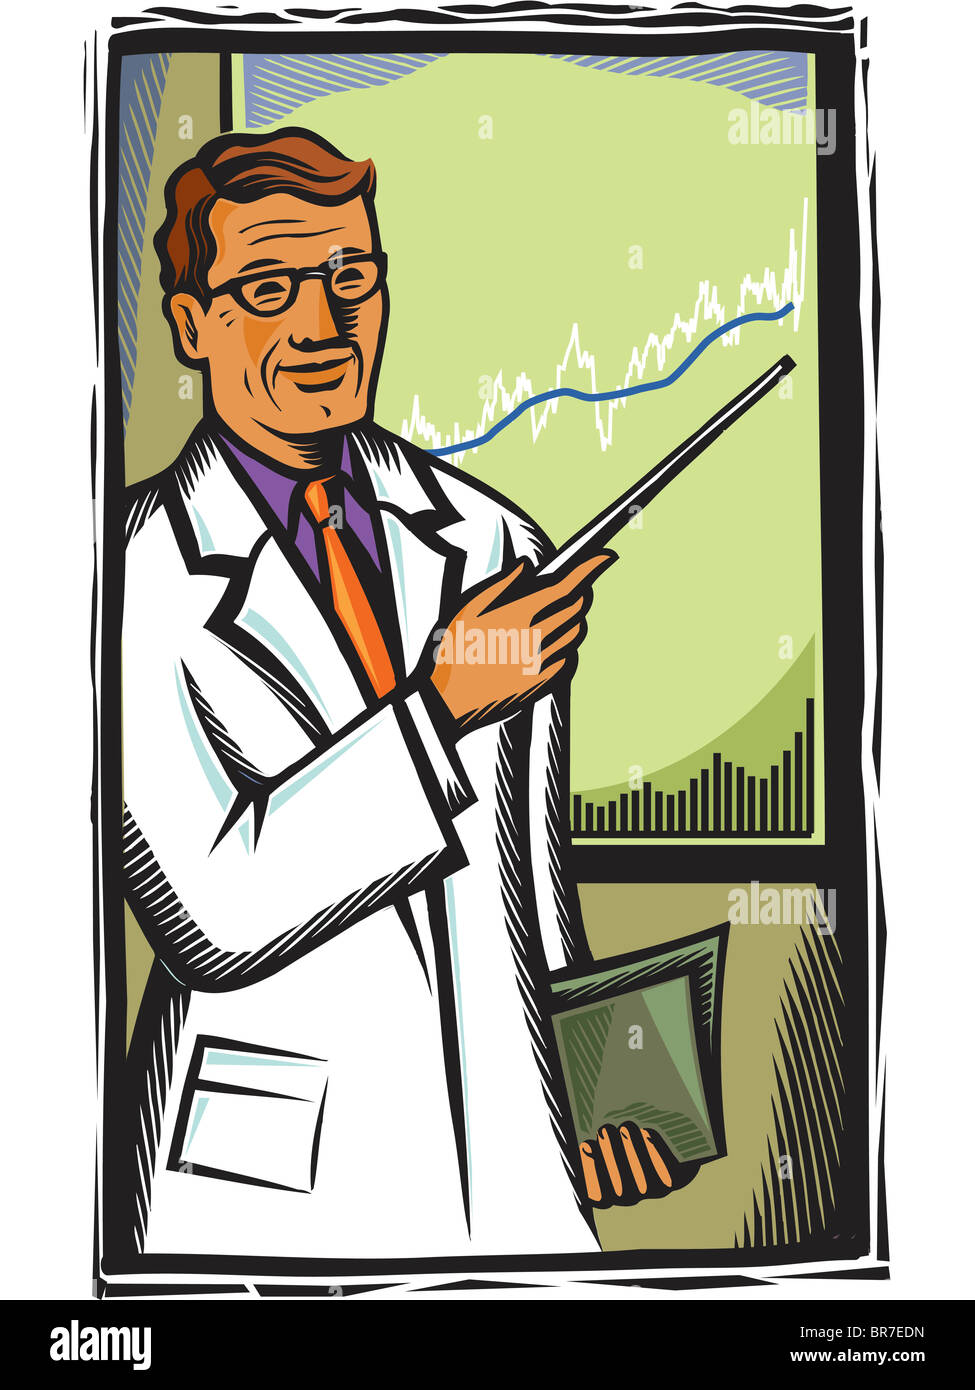 A doctor pointing to a growth chart Stock Photo